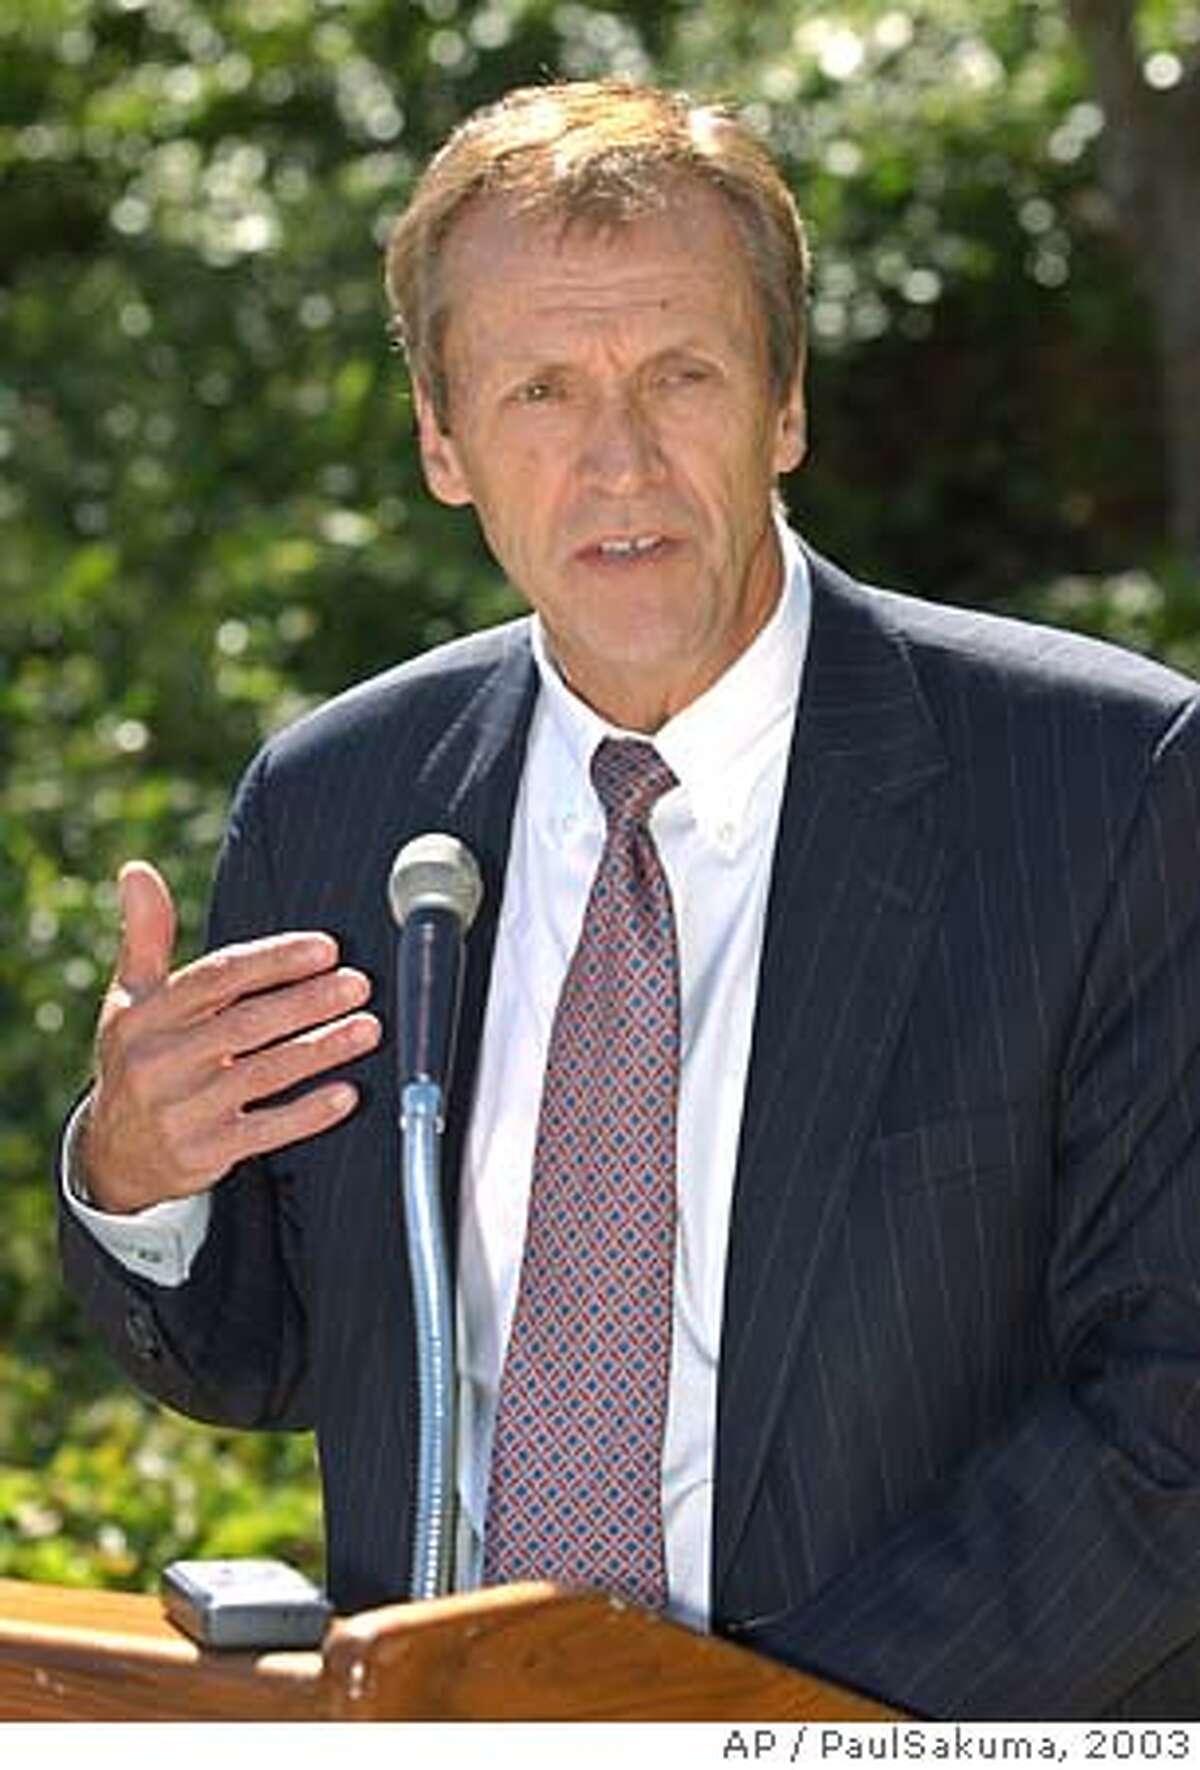 Robert C. Dynes, chancellor of the University of California, San Diego, gestures during a news conference in opposition to Proposition 54 during a break in the UC Board of Regents meeting in San Francisco, Wednesday, Sept. 17, 2003. Proposition 54 prohibits state and local governments from classifying any person by race, ethnicity, color or national origin in public education, contracting or employment. Dynes will replace UC President Richard C. Atkinson, who is retiring later this year. (AP Photo/PaulSakuma)